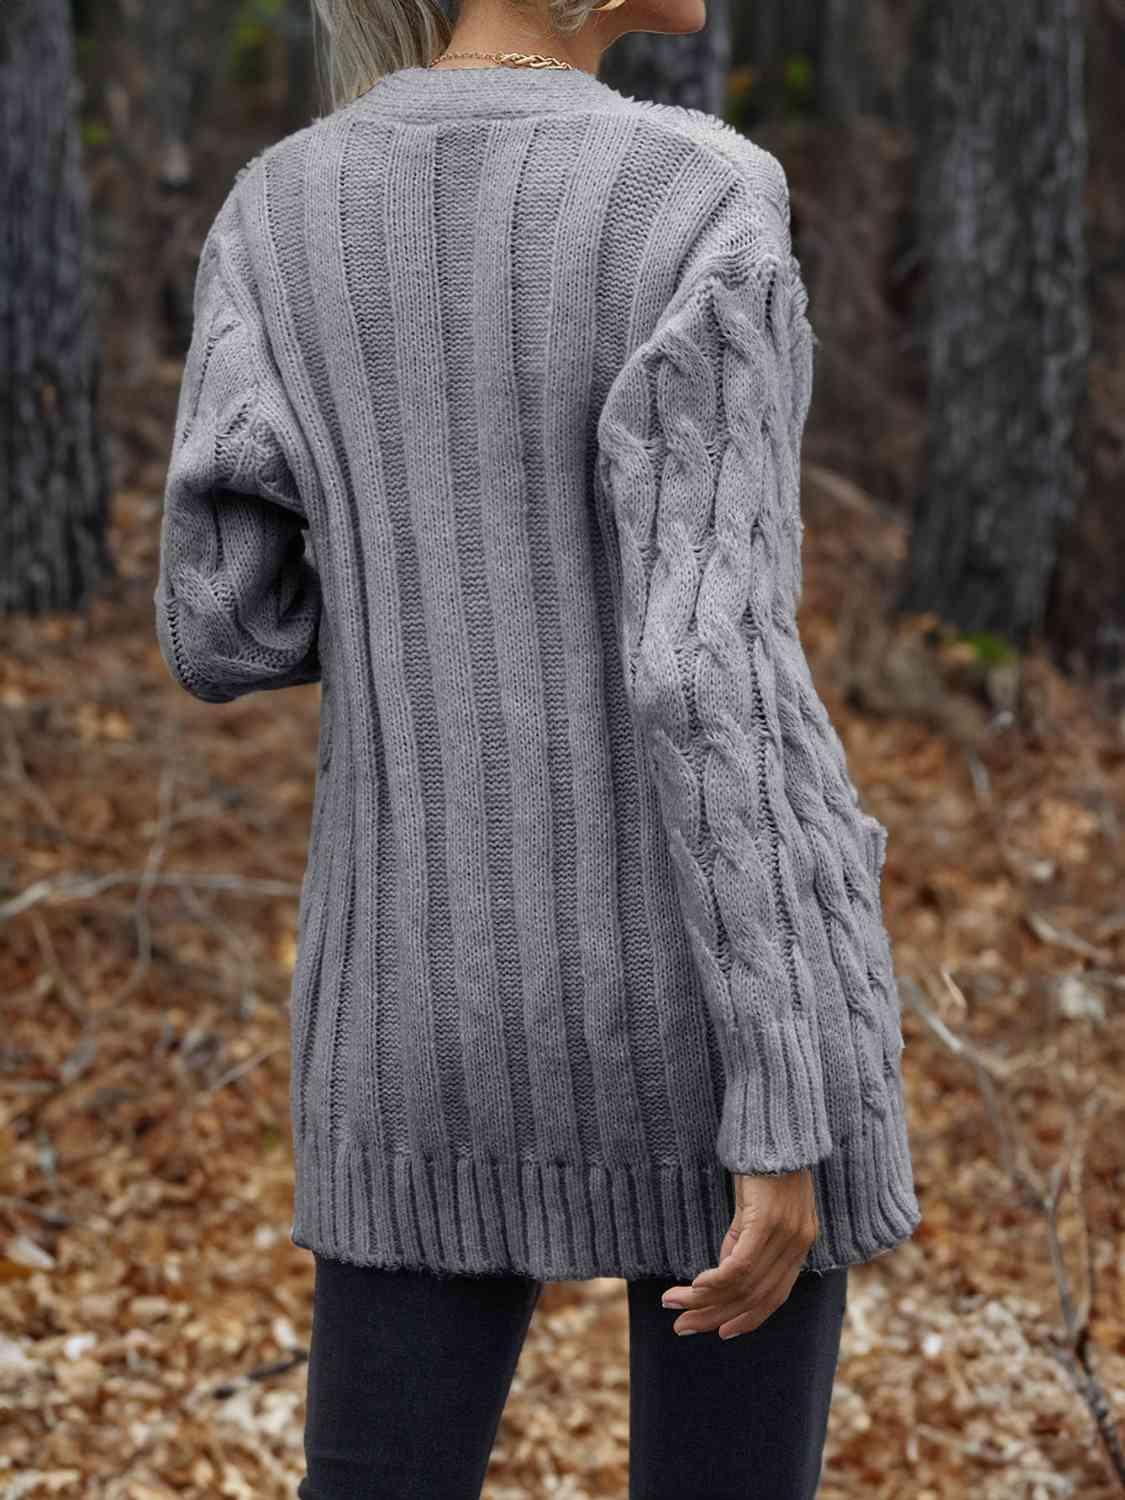 a woman wearing a gray sweater in the woods